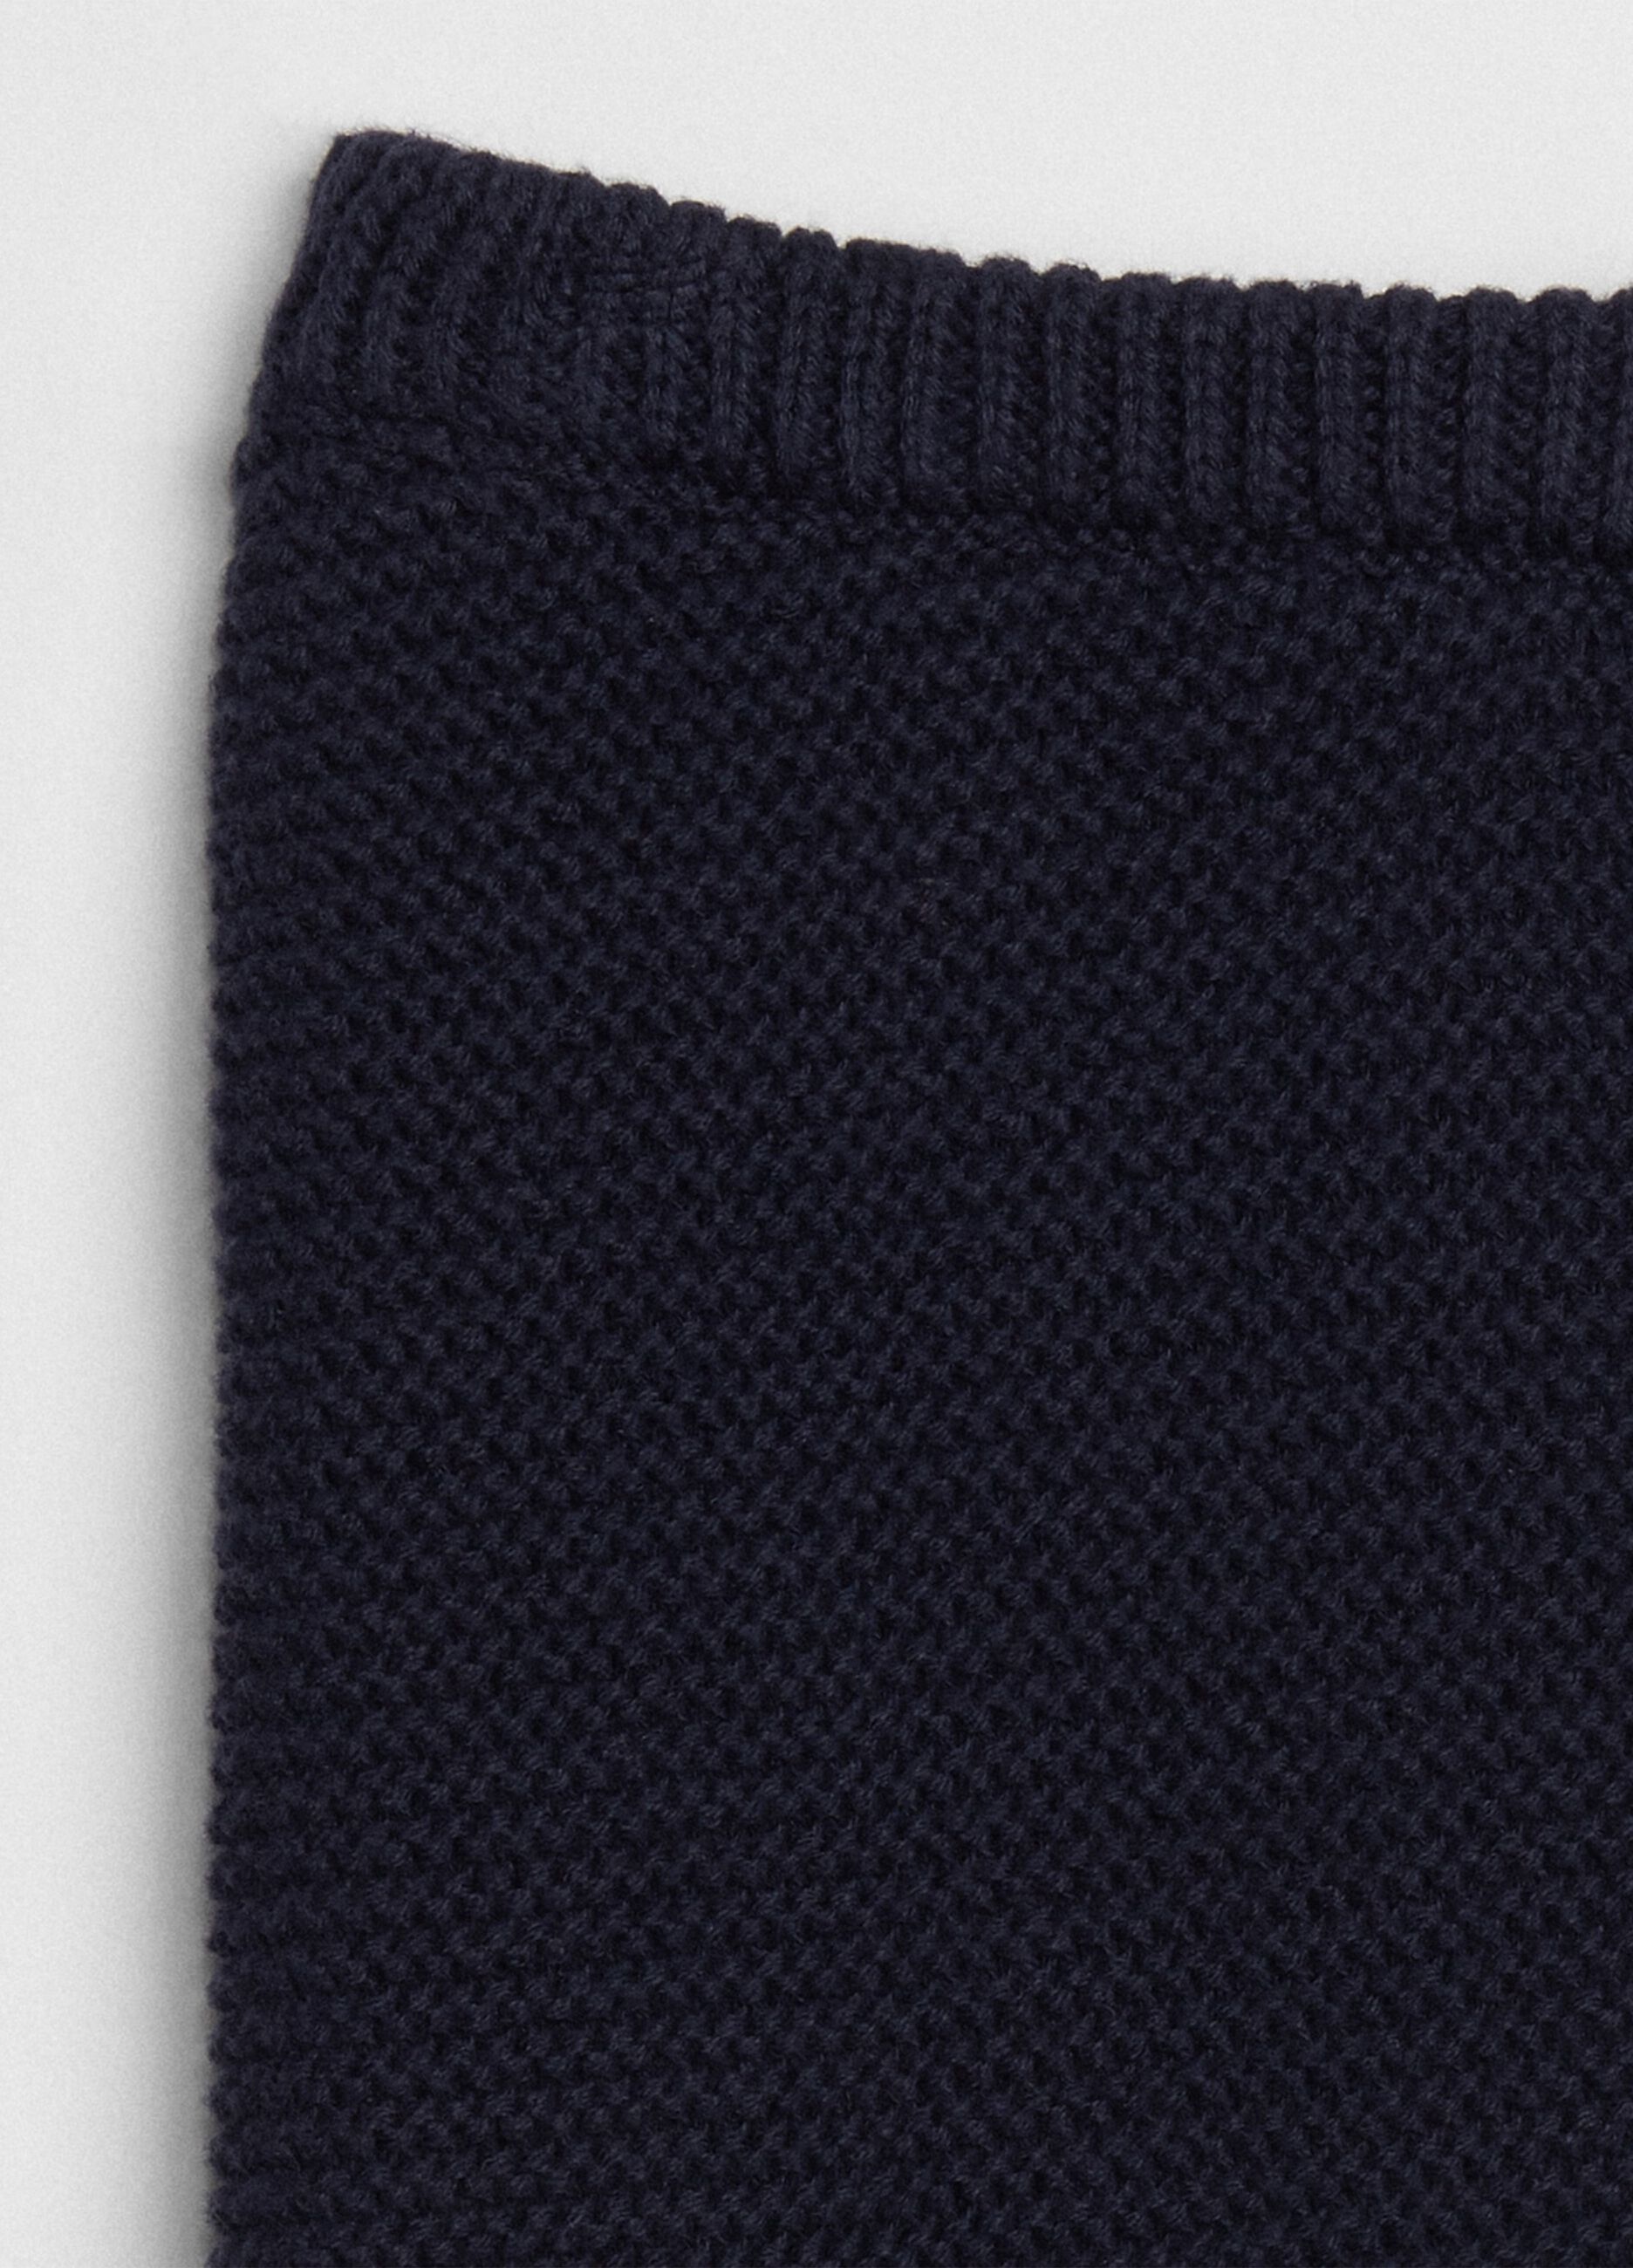 Knit trousers